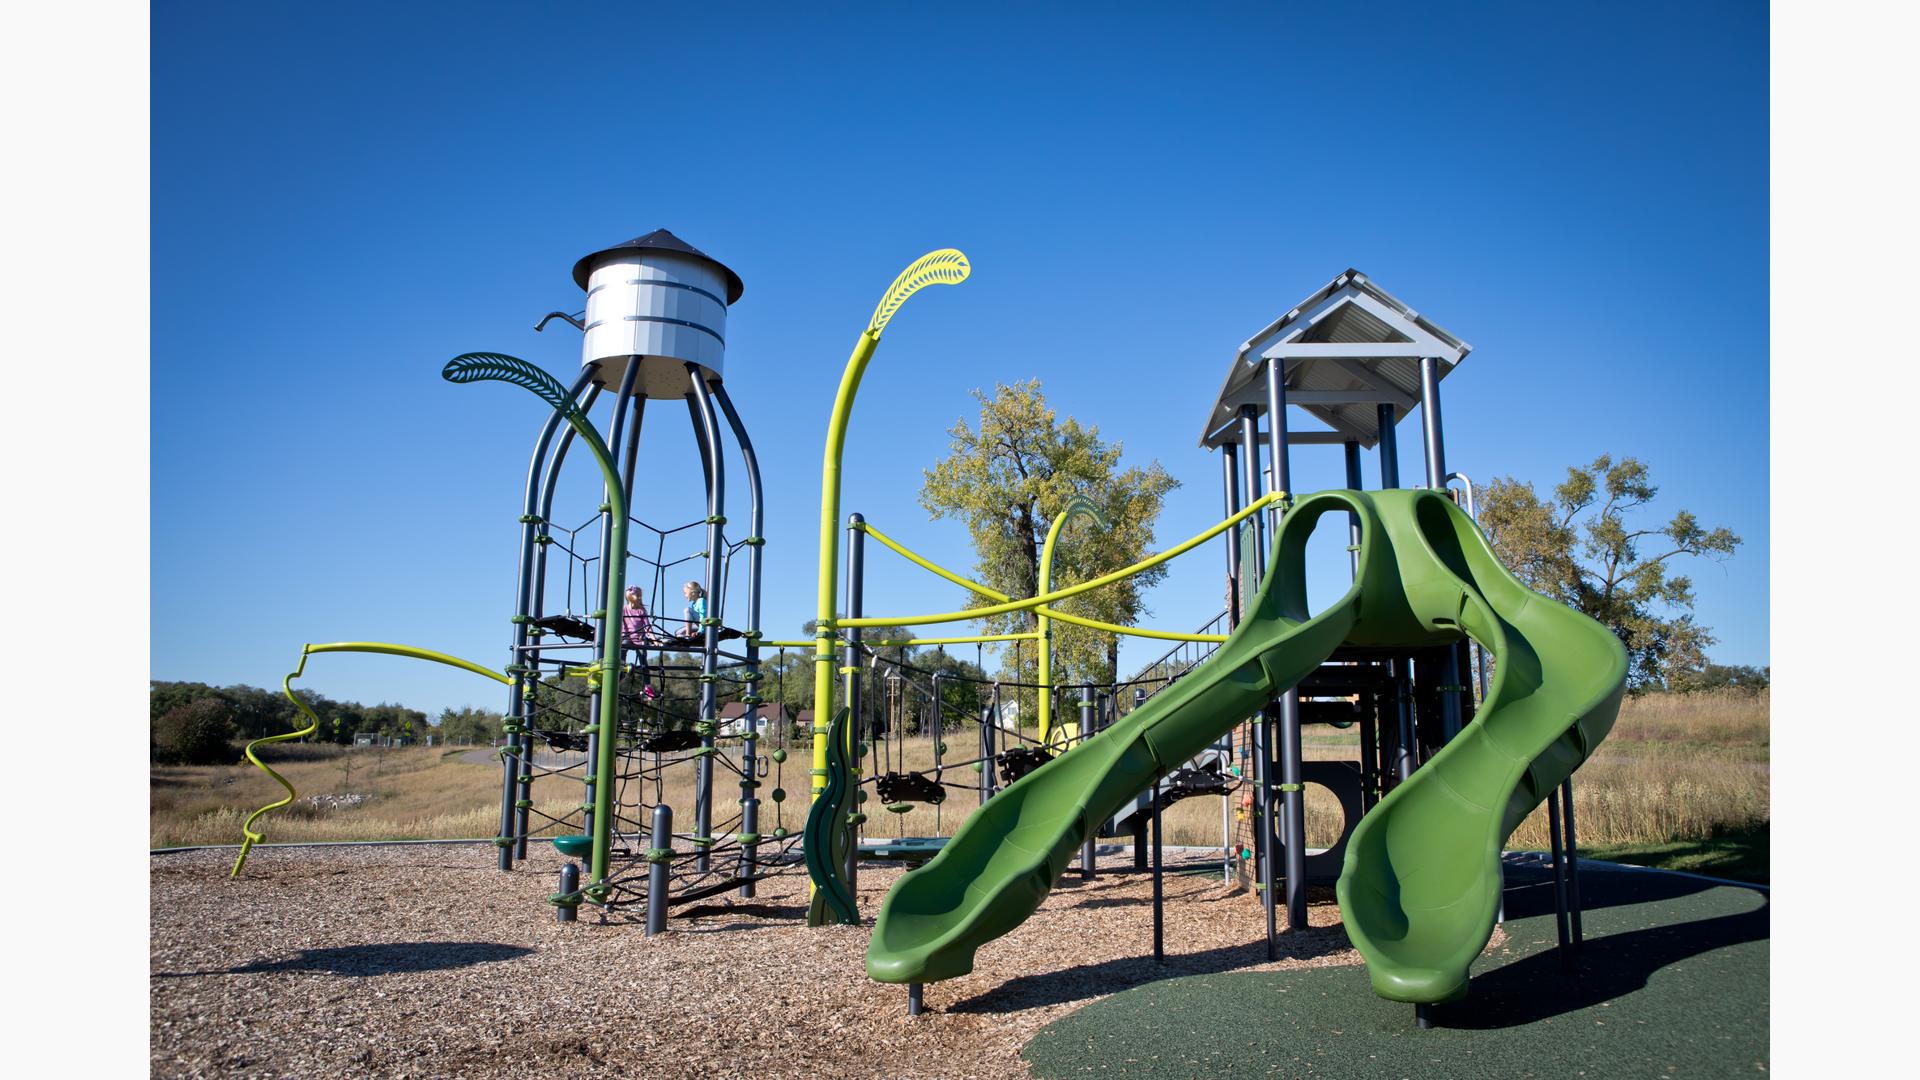 Green playground with tall net structure that has a silo type roof and tall posts shaped like wheat stalks. Double green slide in front with open grass and a few trees in the background.